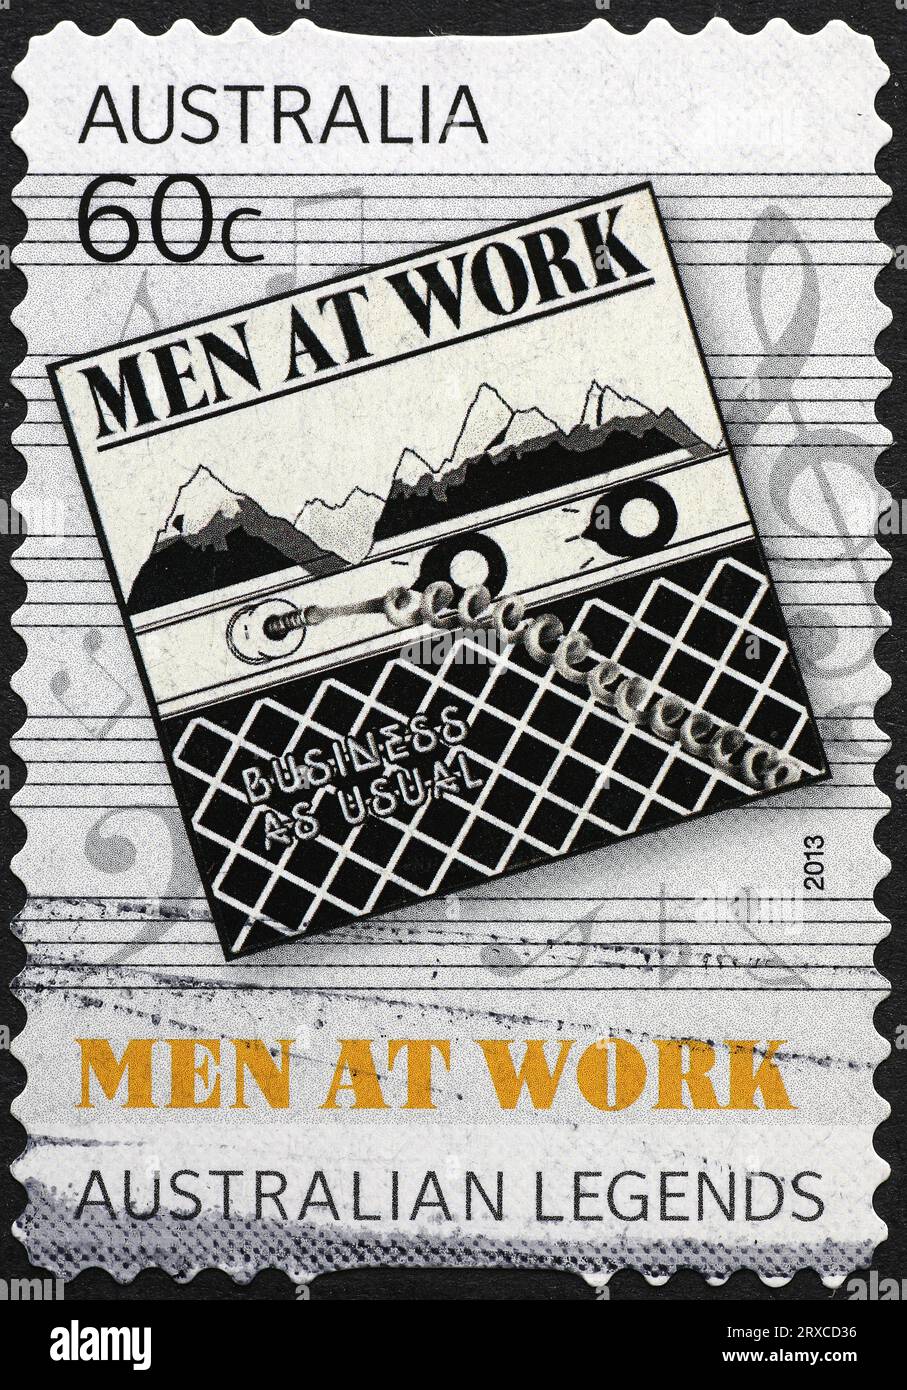 Album 'Business as usual' by Men at work on australian stamp Stock Photo